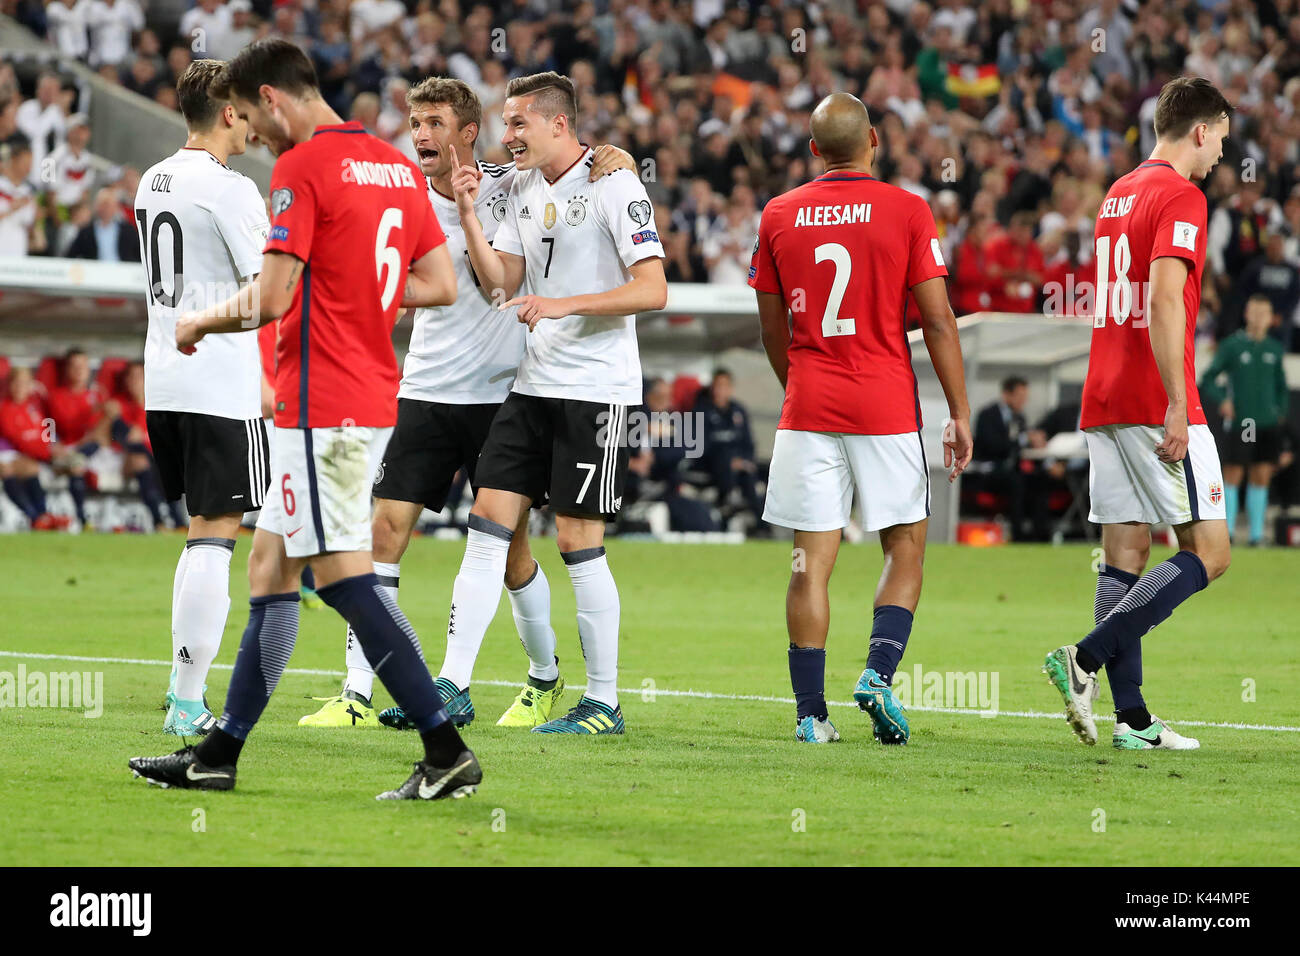 Stuttgart, Germany. 4th Sep, 2017. Germany's Julian Draxler (3rd R) celebrates after scoring during a 2018 World Cup qualification match between Germany and Norway in Stuttgart, Germany, on Sept. 4, 2017. Germany won 6-0. Credit: Ulrich Hufnagel/Xinhua/Alamy Live News Stock Photo